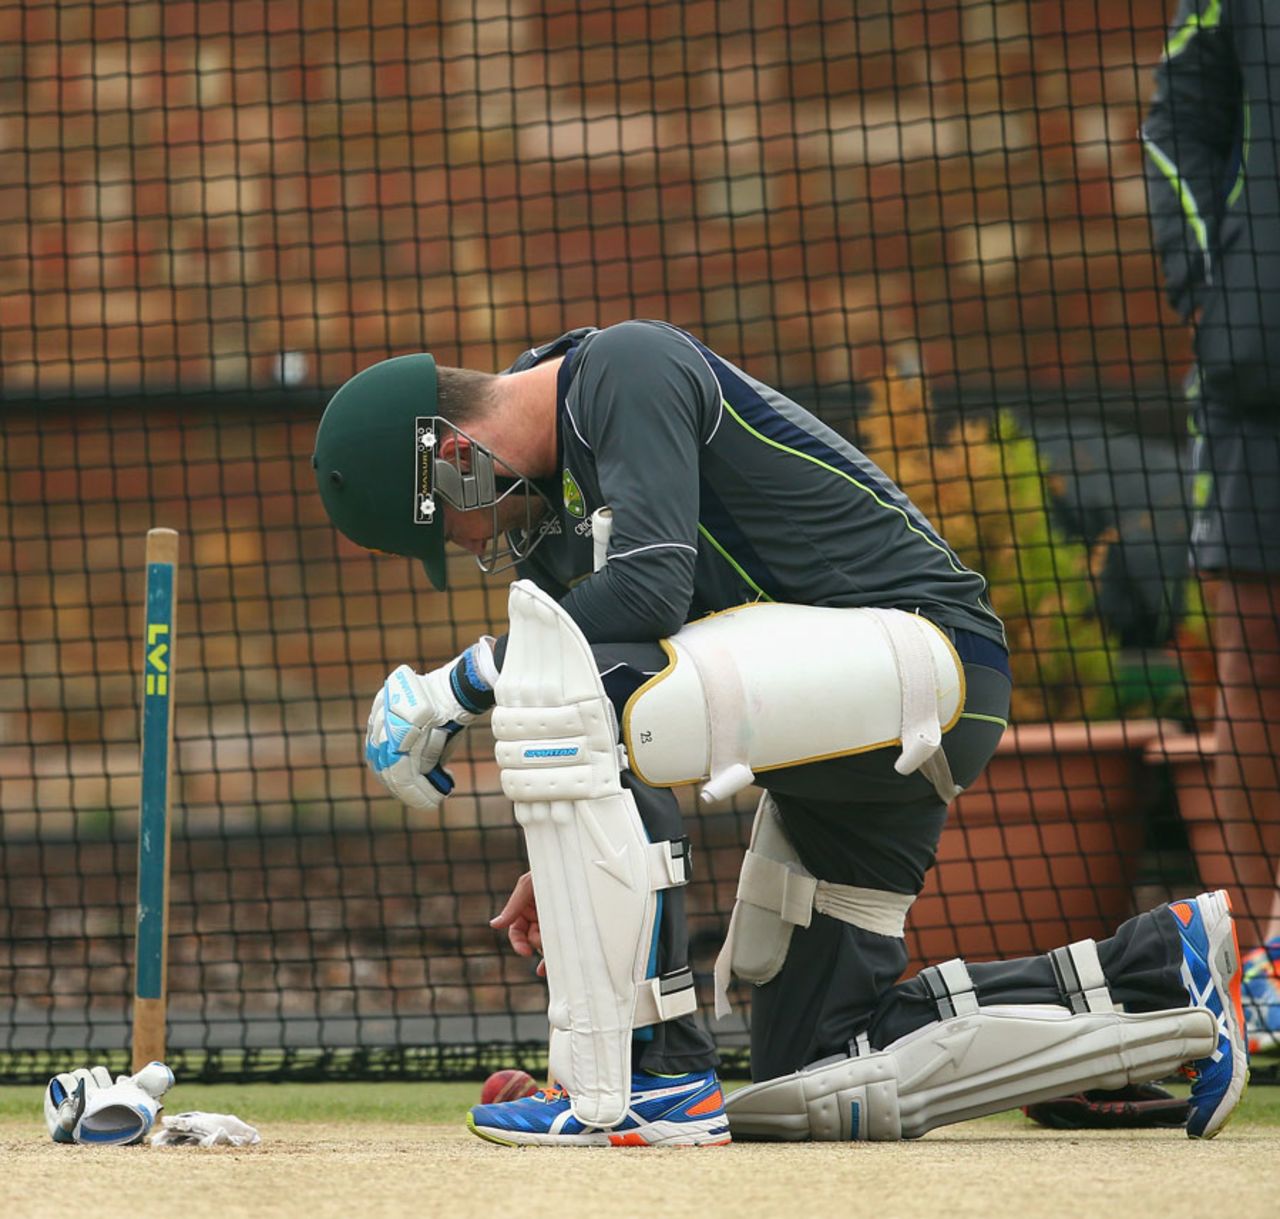 Michael Clarke was struck on his hand while training, County Ground, Northampton, August 15, 2013